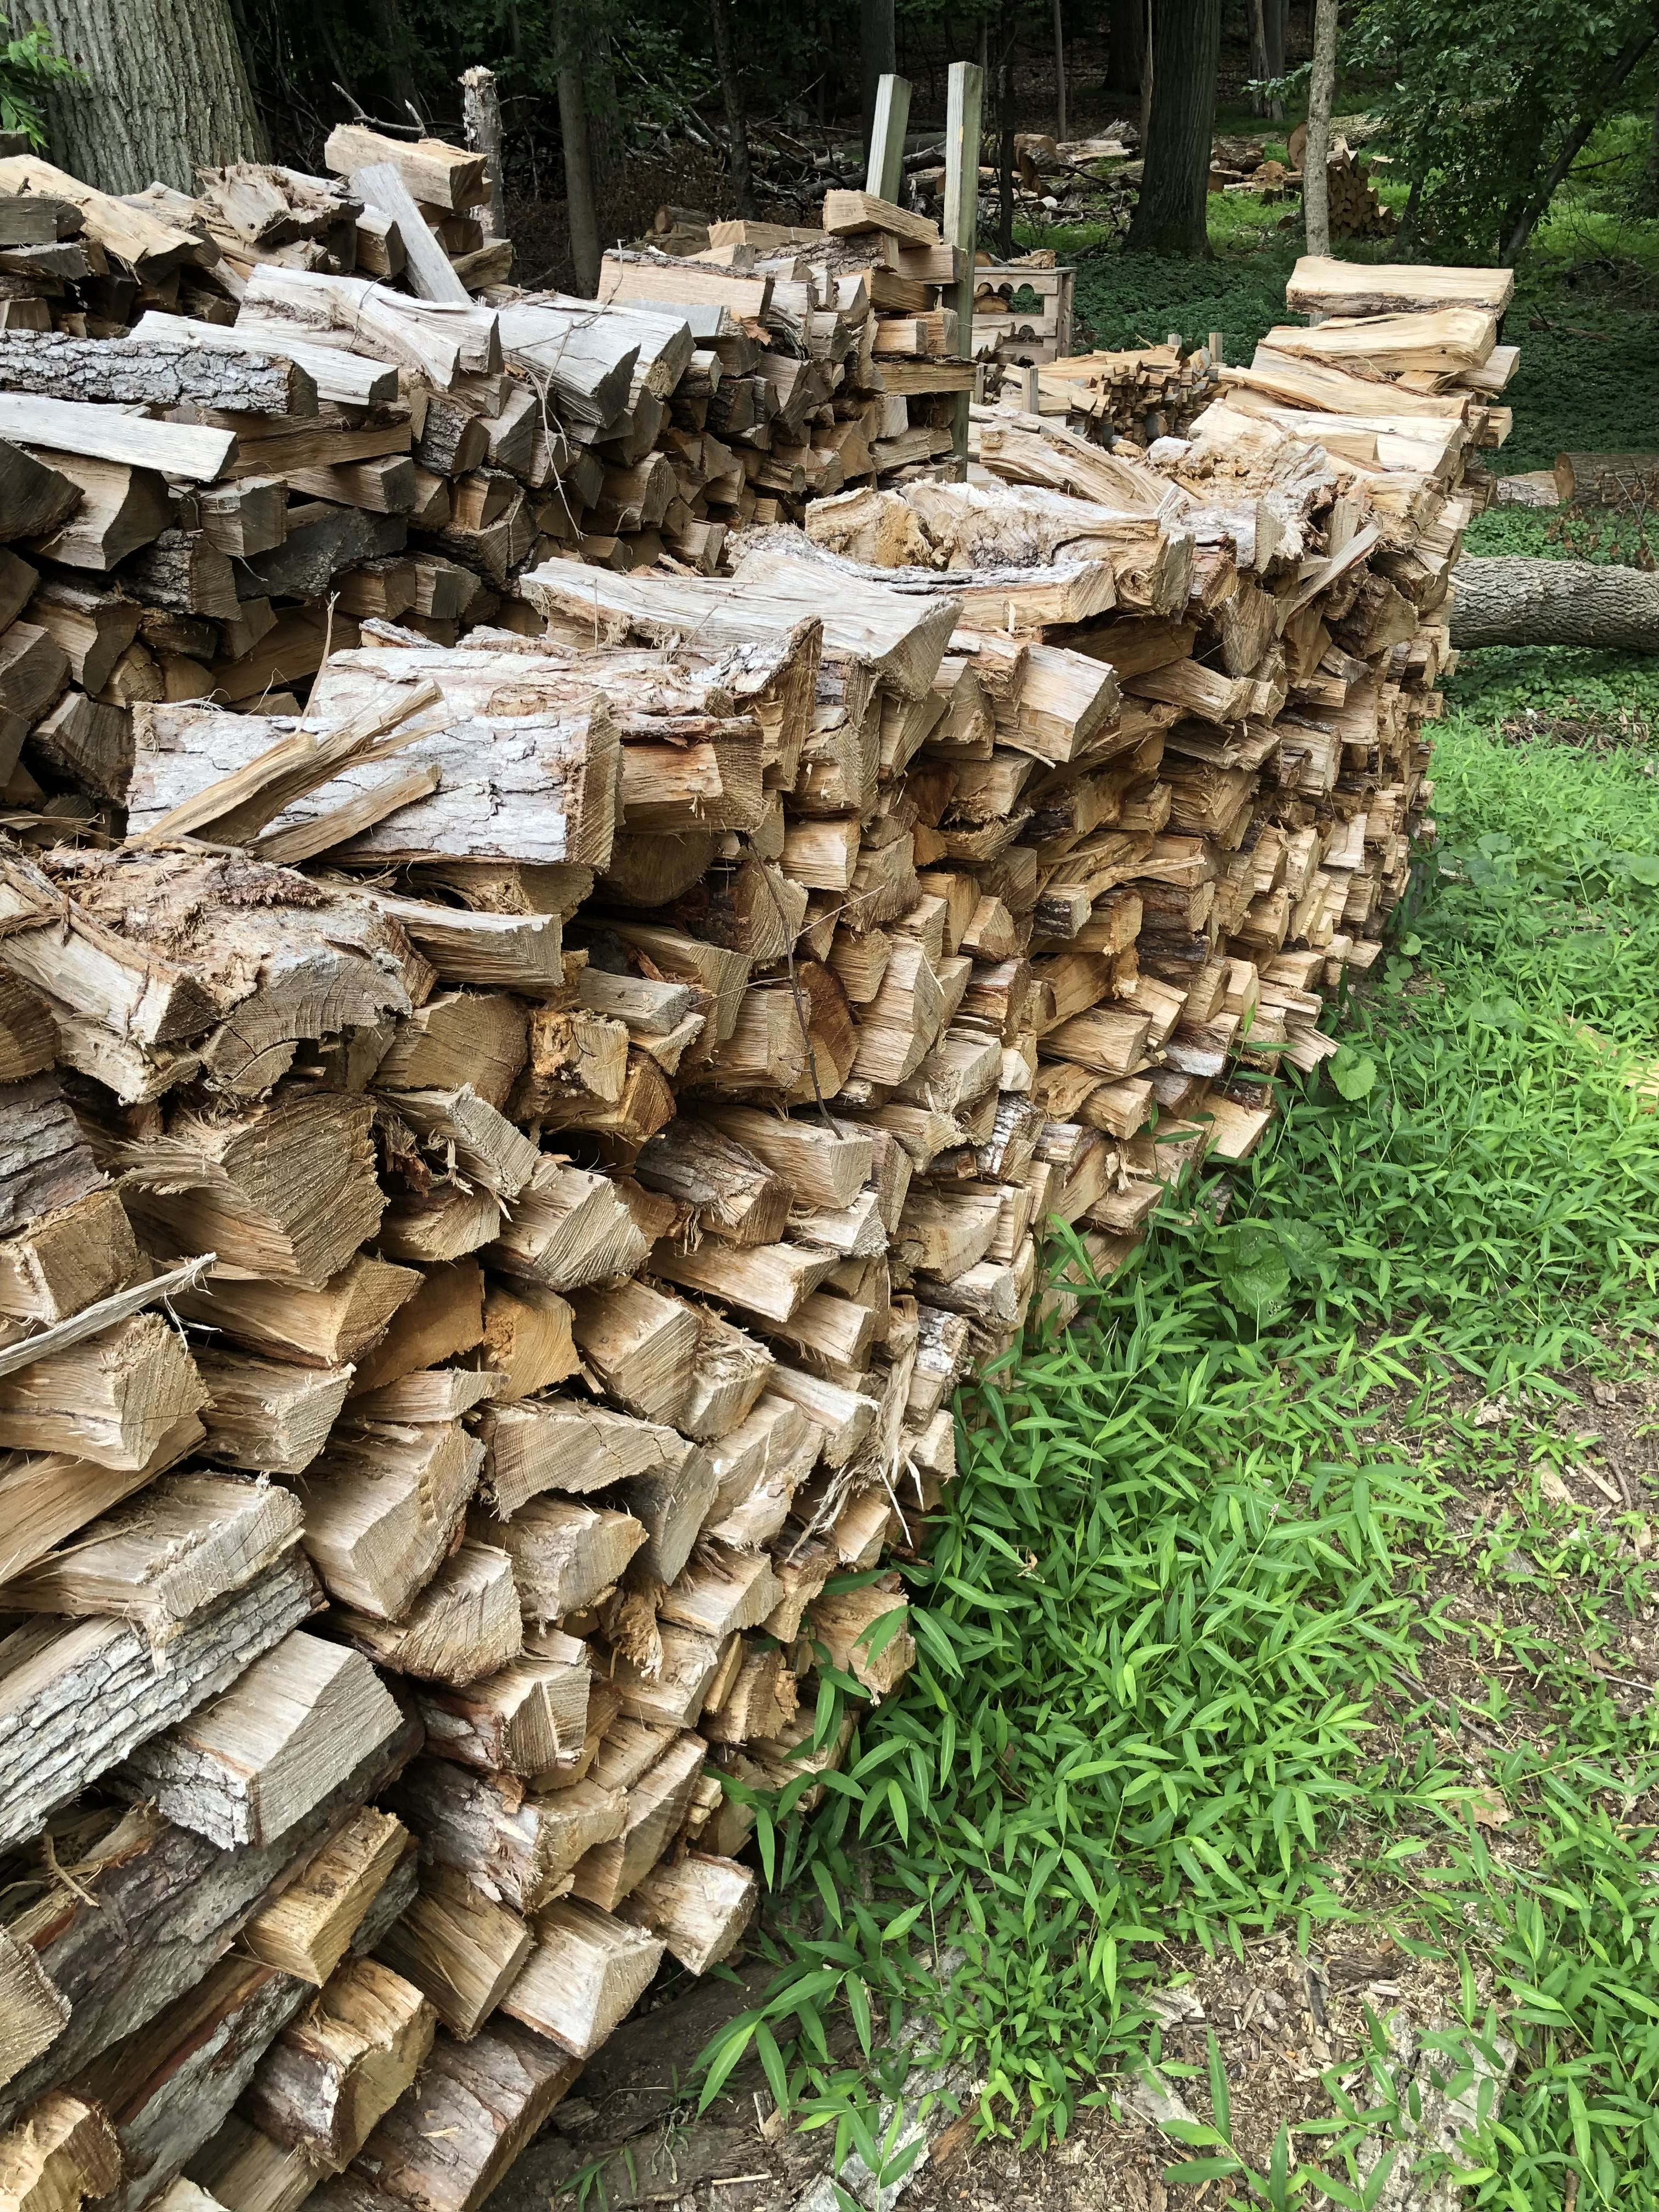 Philly's firewood suppliers have a tough job, but they love to do it